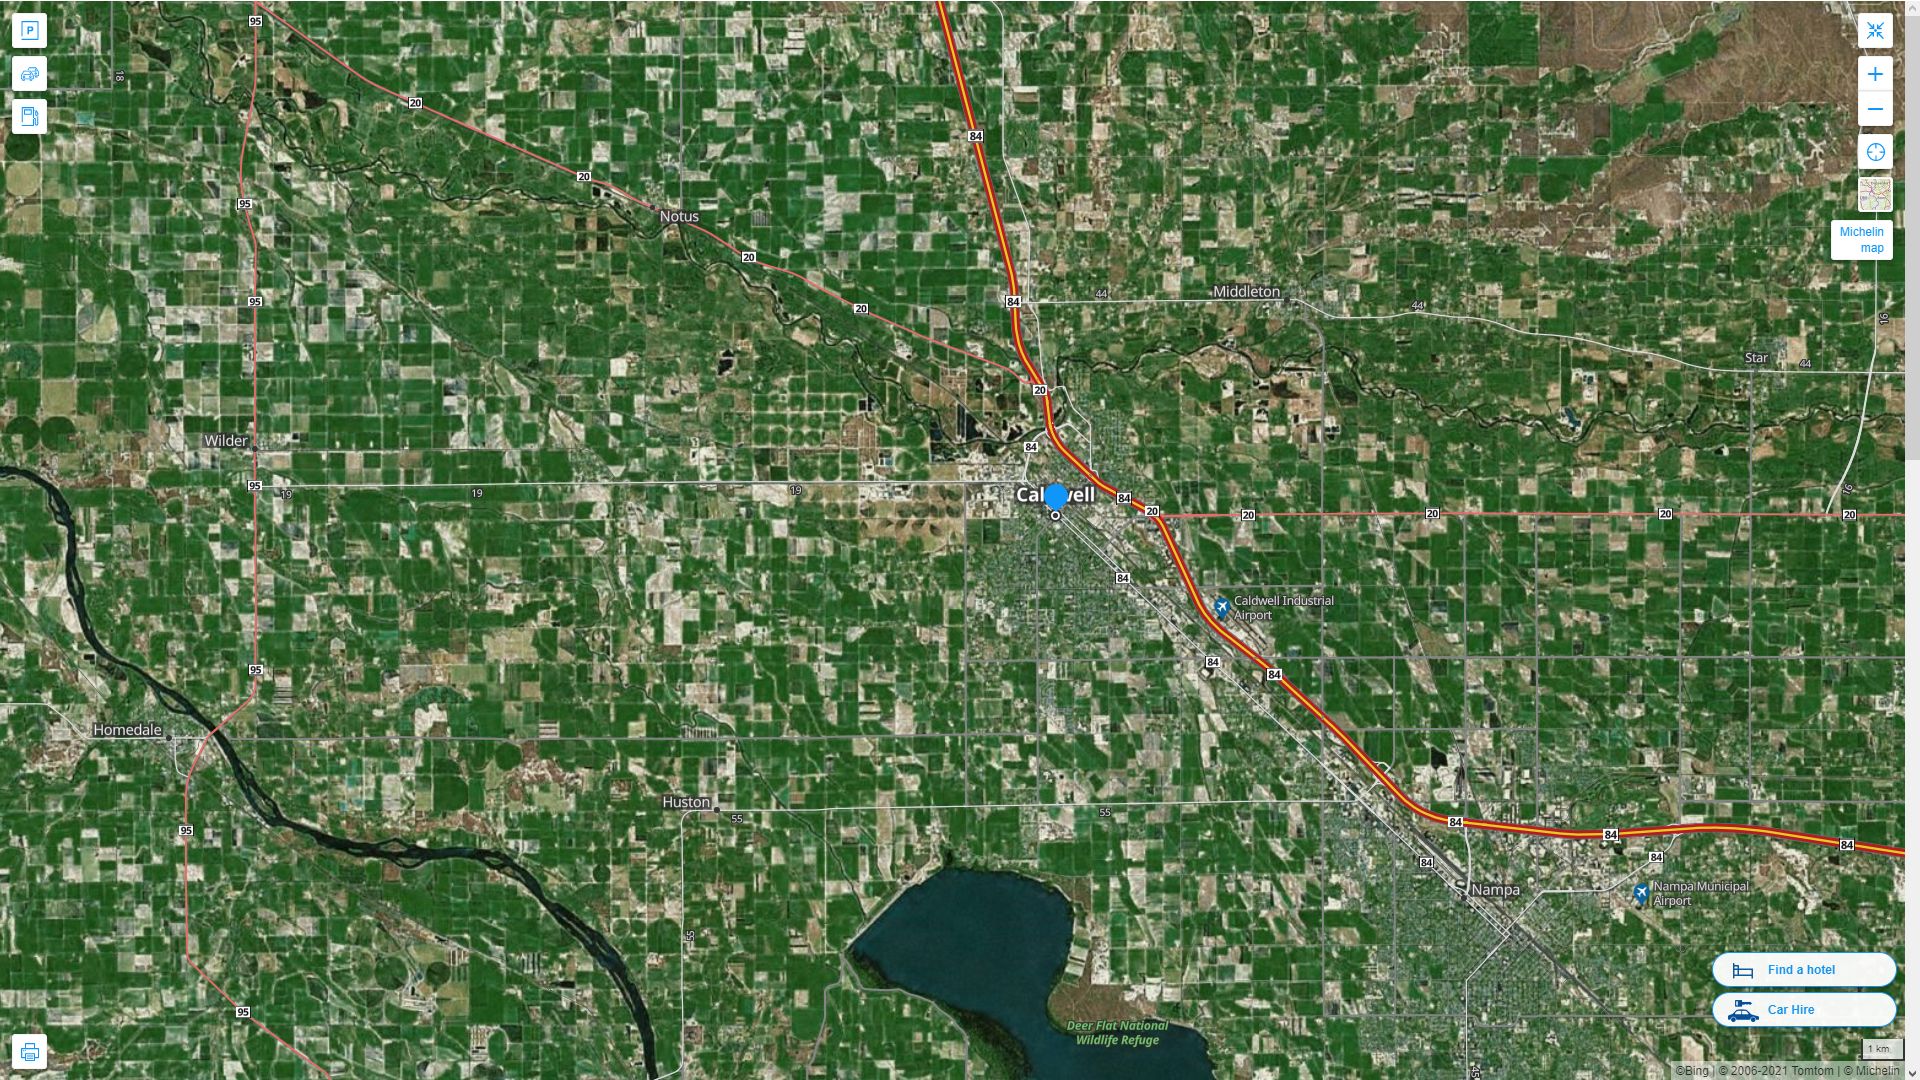 Caldwell idaho Highway and Road Map with Satellite View